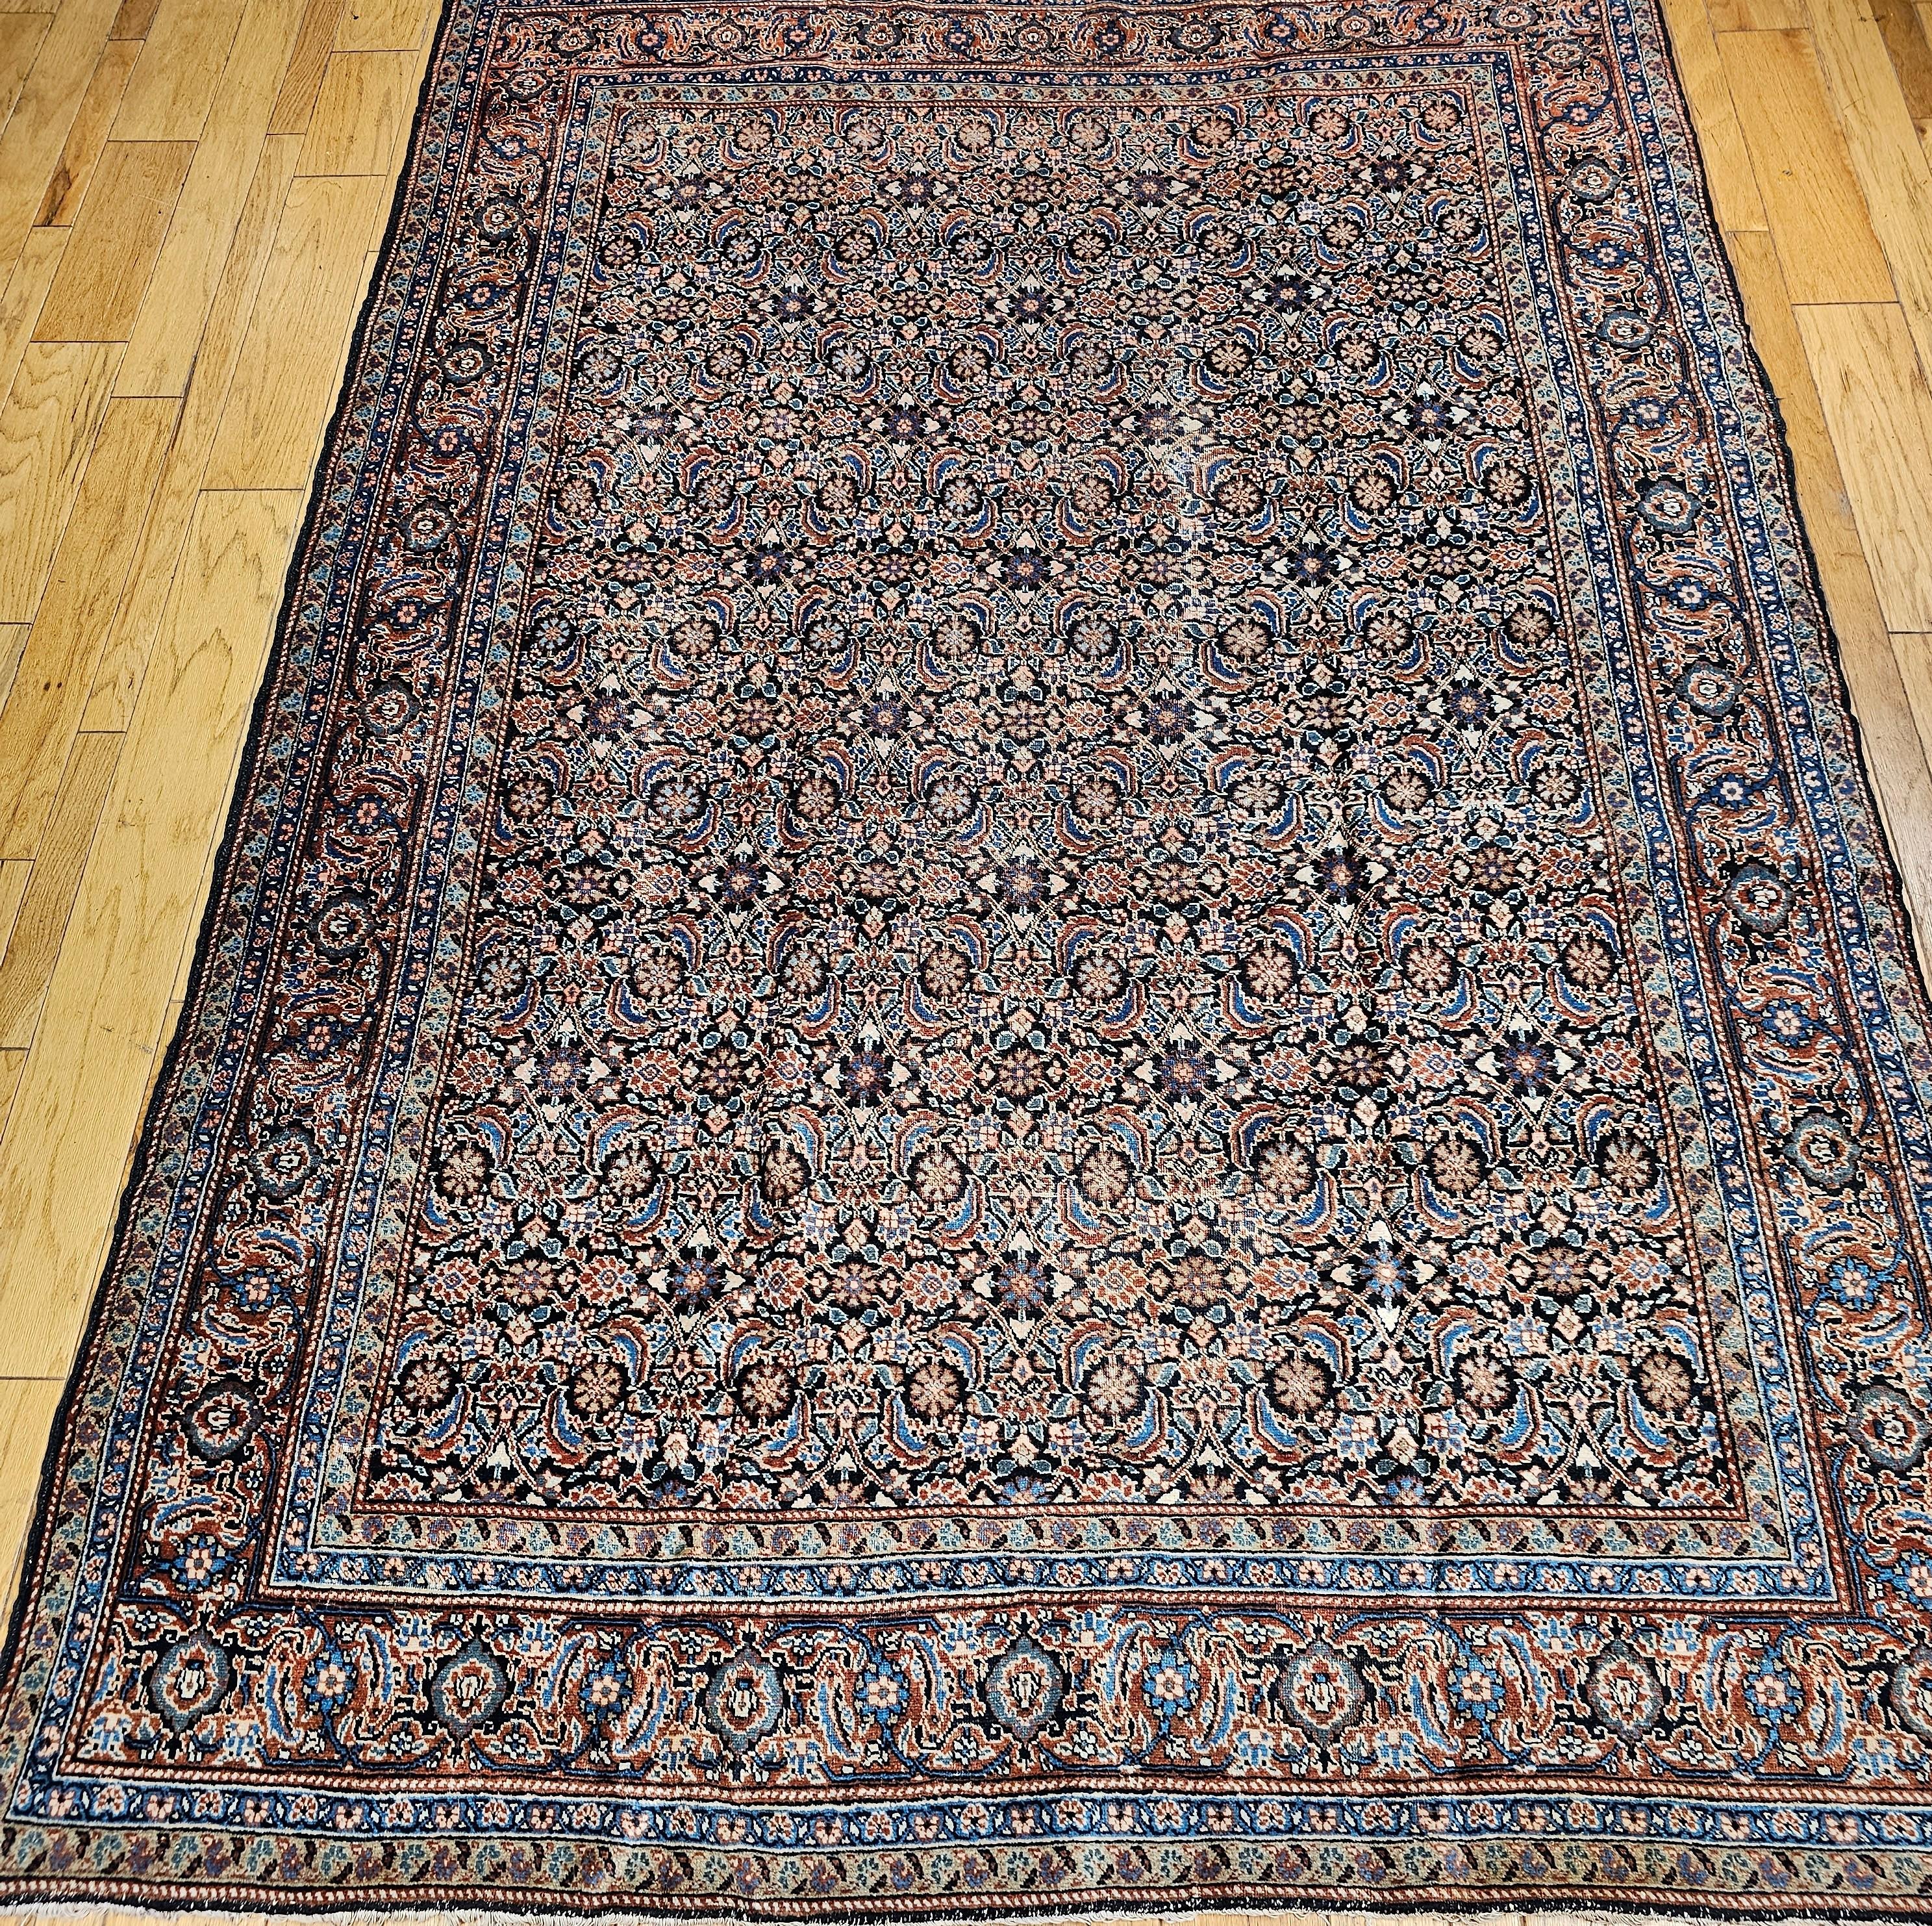 Beautiful room size Persian Tabriz in an all-over Herati  pattern from the first quarter of the 20th century.  The Tabriz rug has a Herati all-over pattern set in a navy color background with a navy blue border.  The other colors in the field and